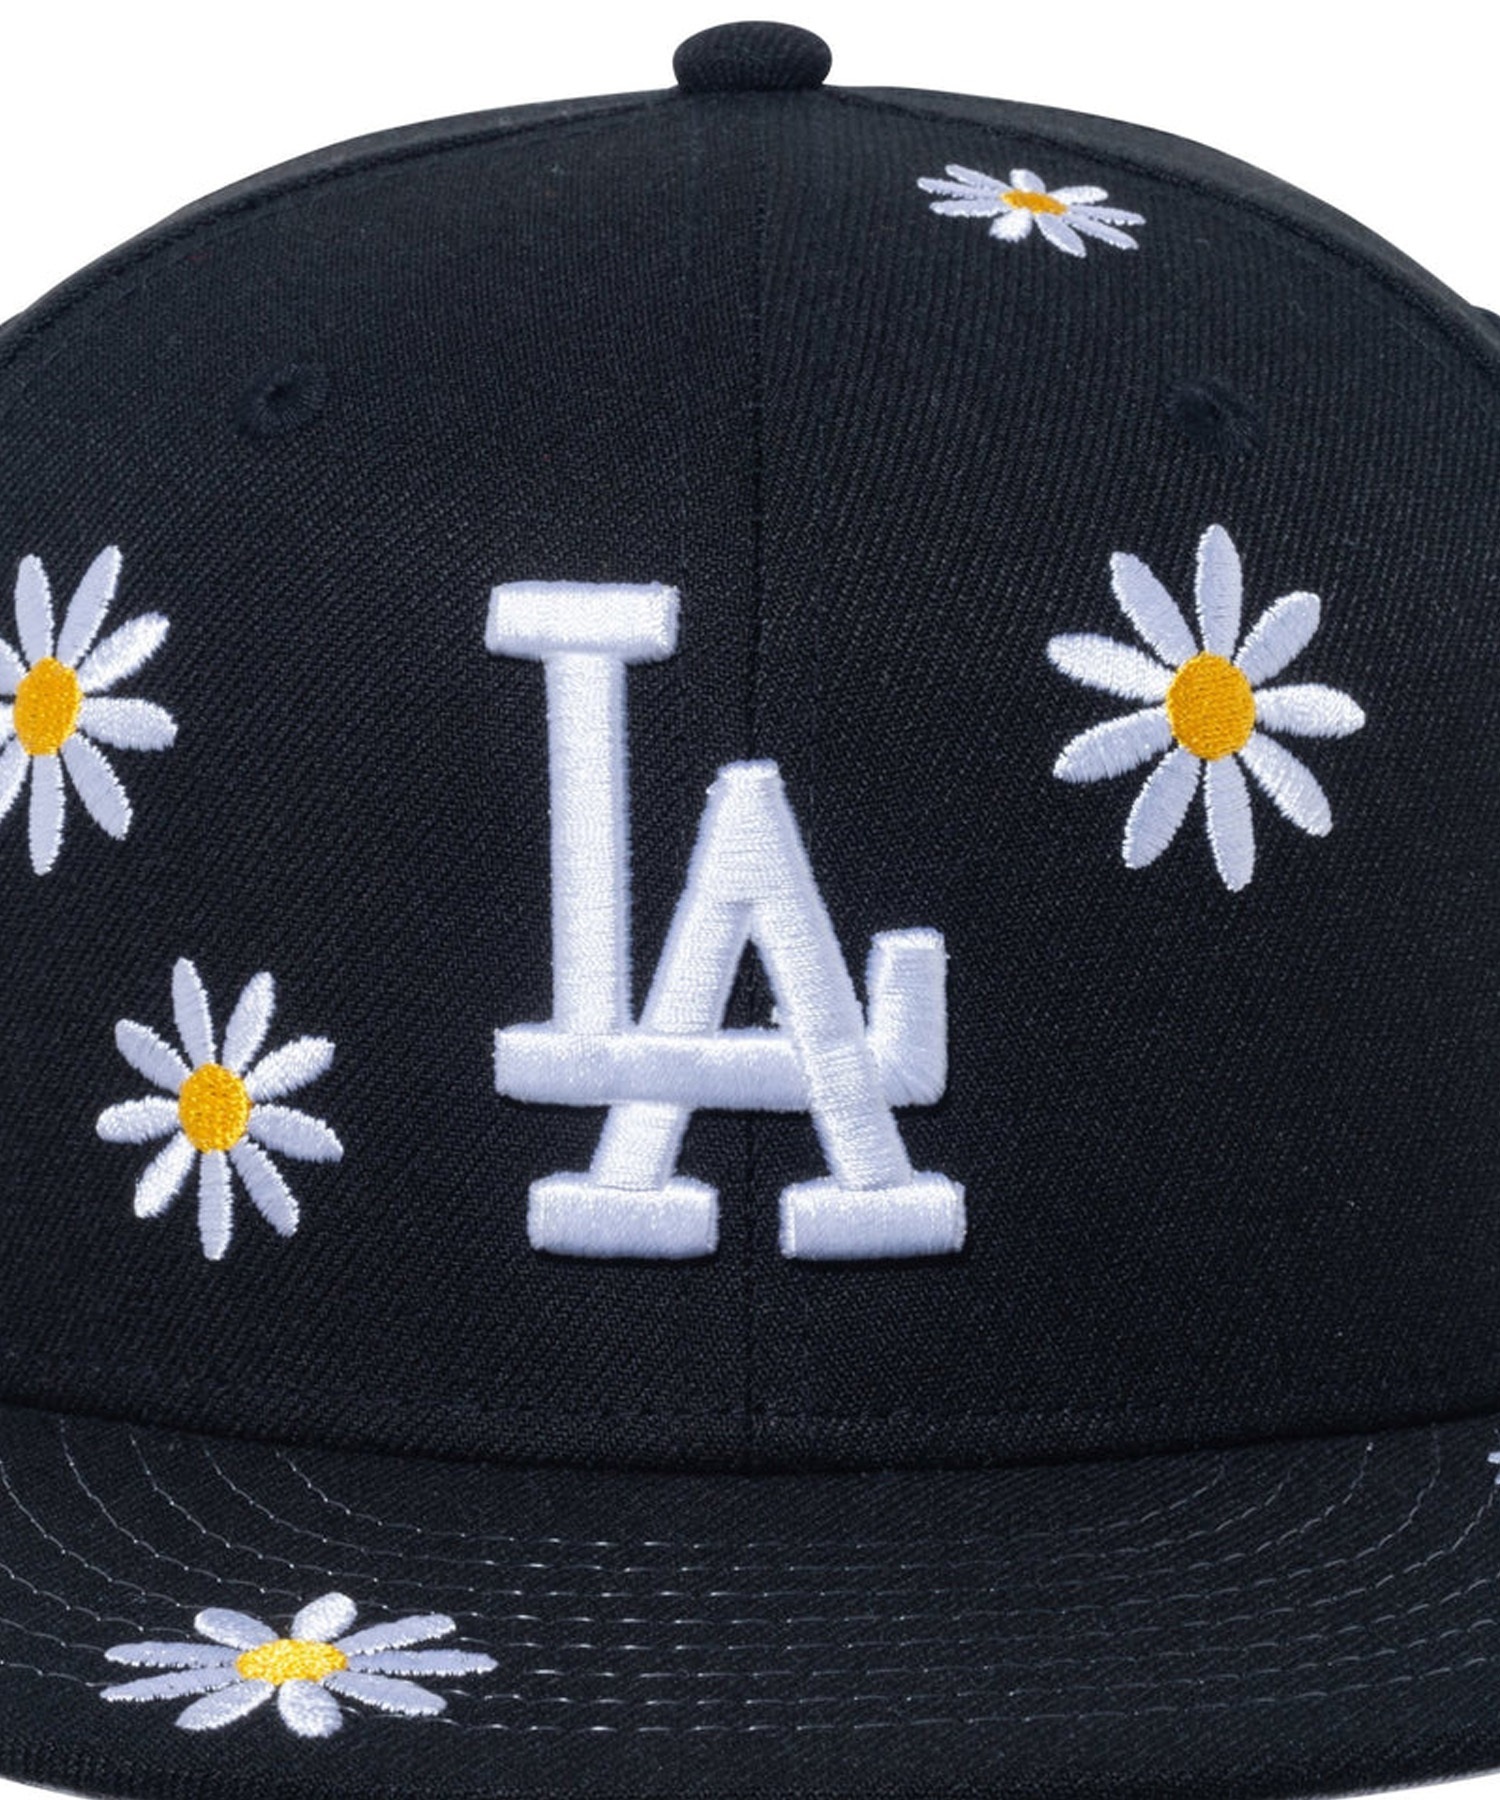 NEW ERA ニューエラ Youth 9FIFTY MLB Flower Embroidery ロサンゼルス